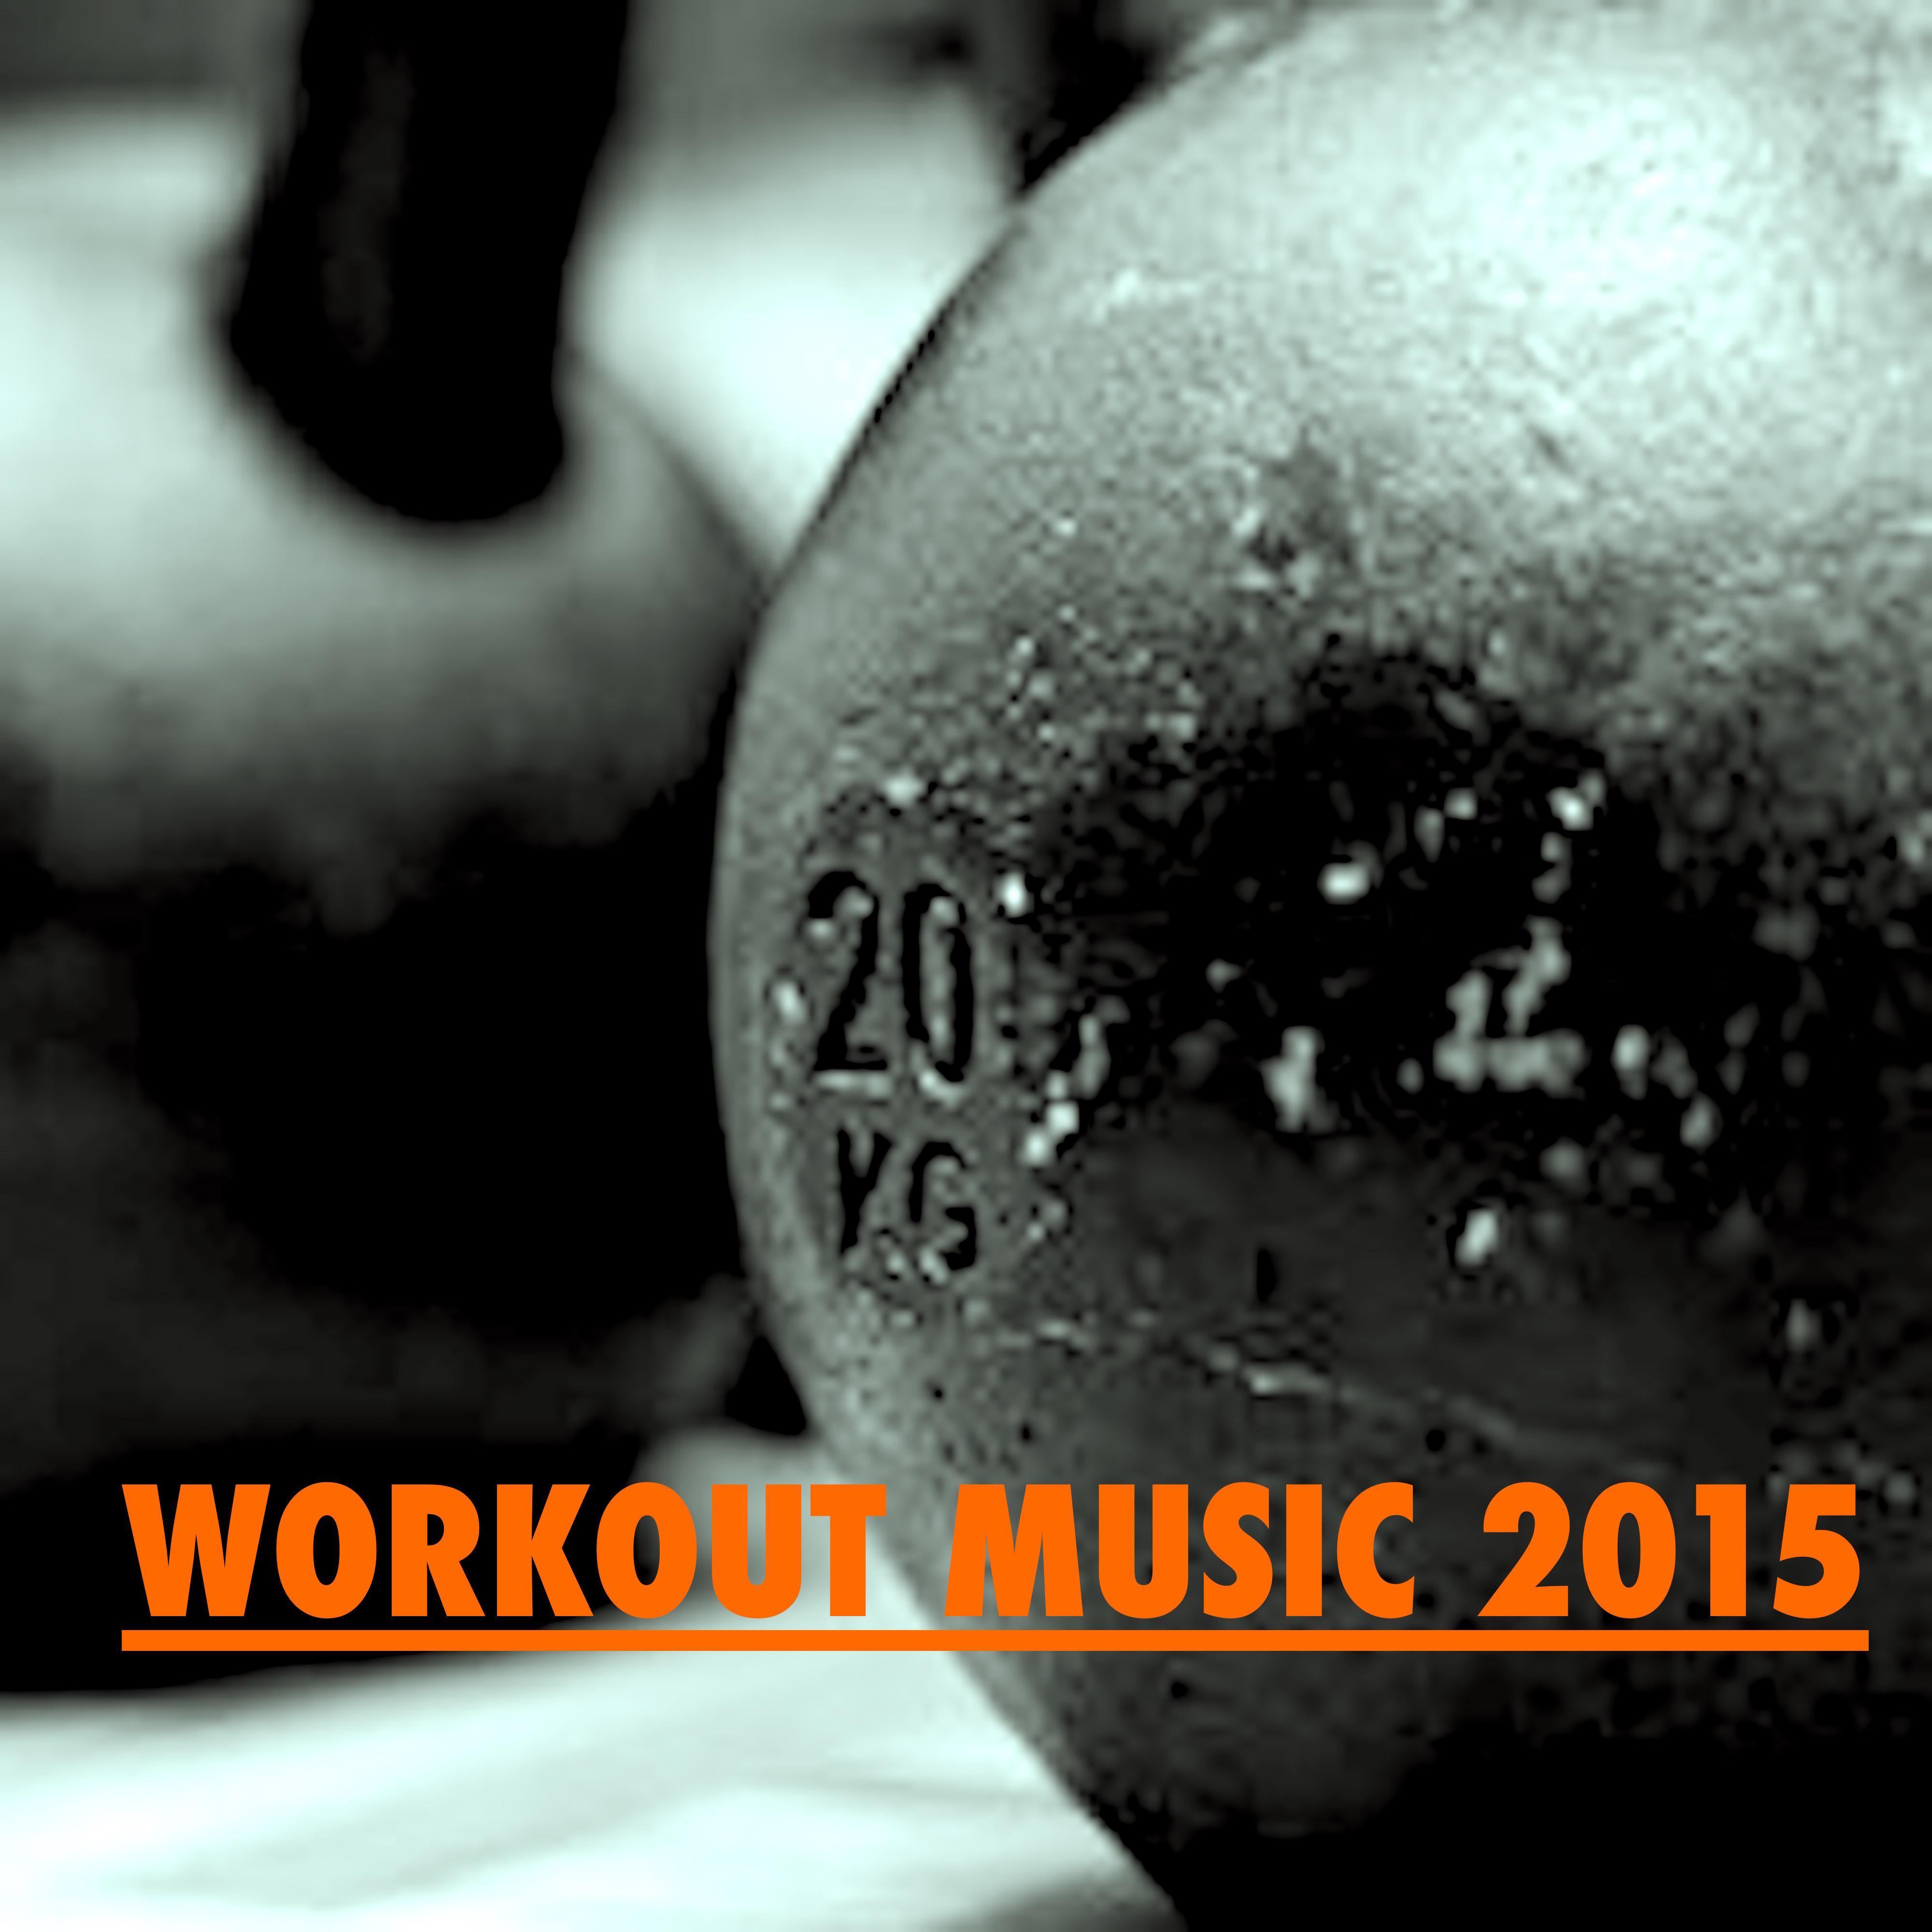 Workout Music 2015: Sounds for Fat Burning Exercises – Aerobic Training Music